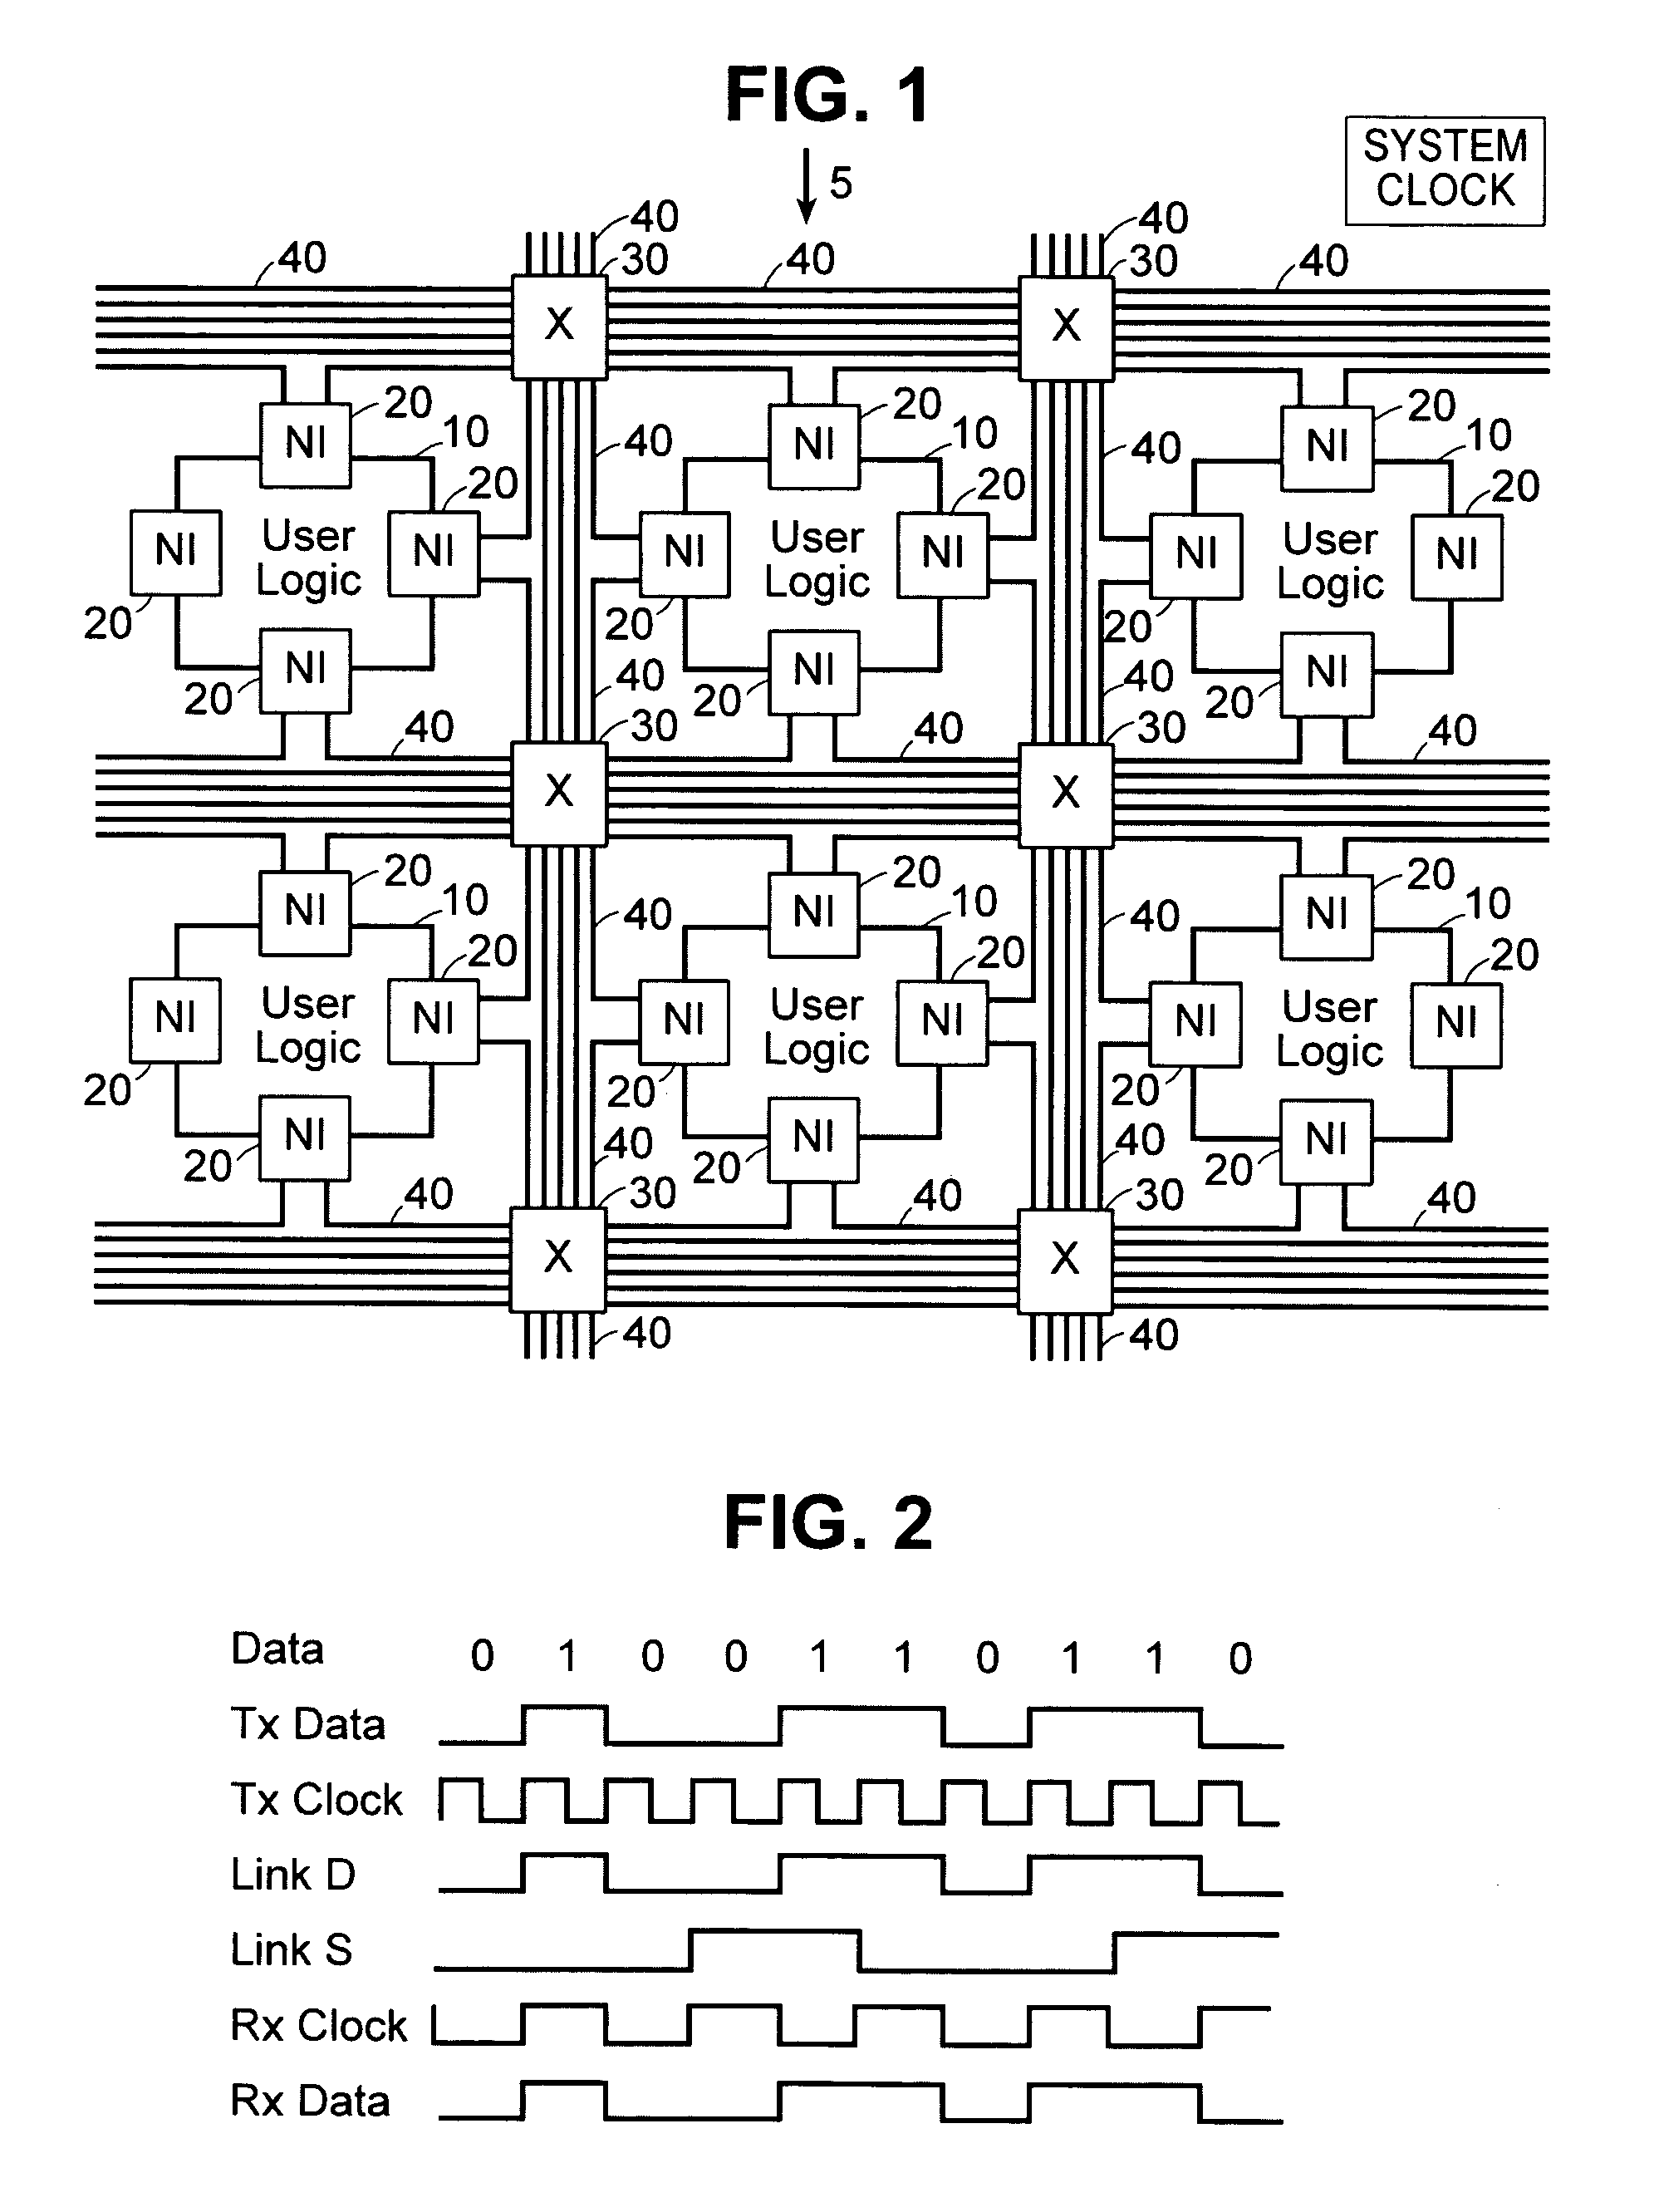 Integrated circuit and related improvements